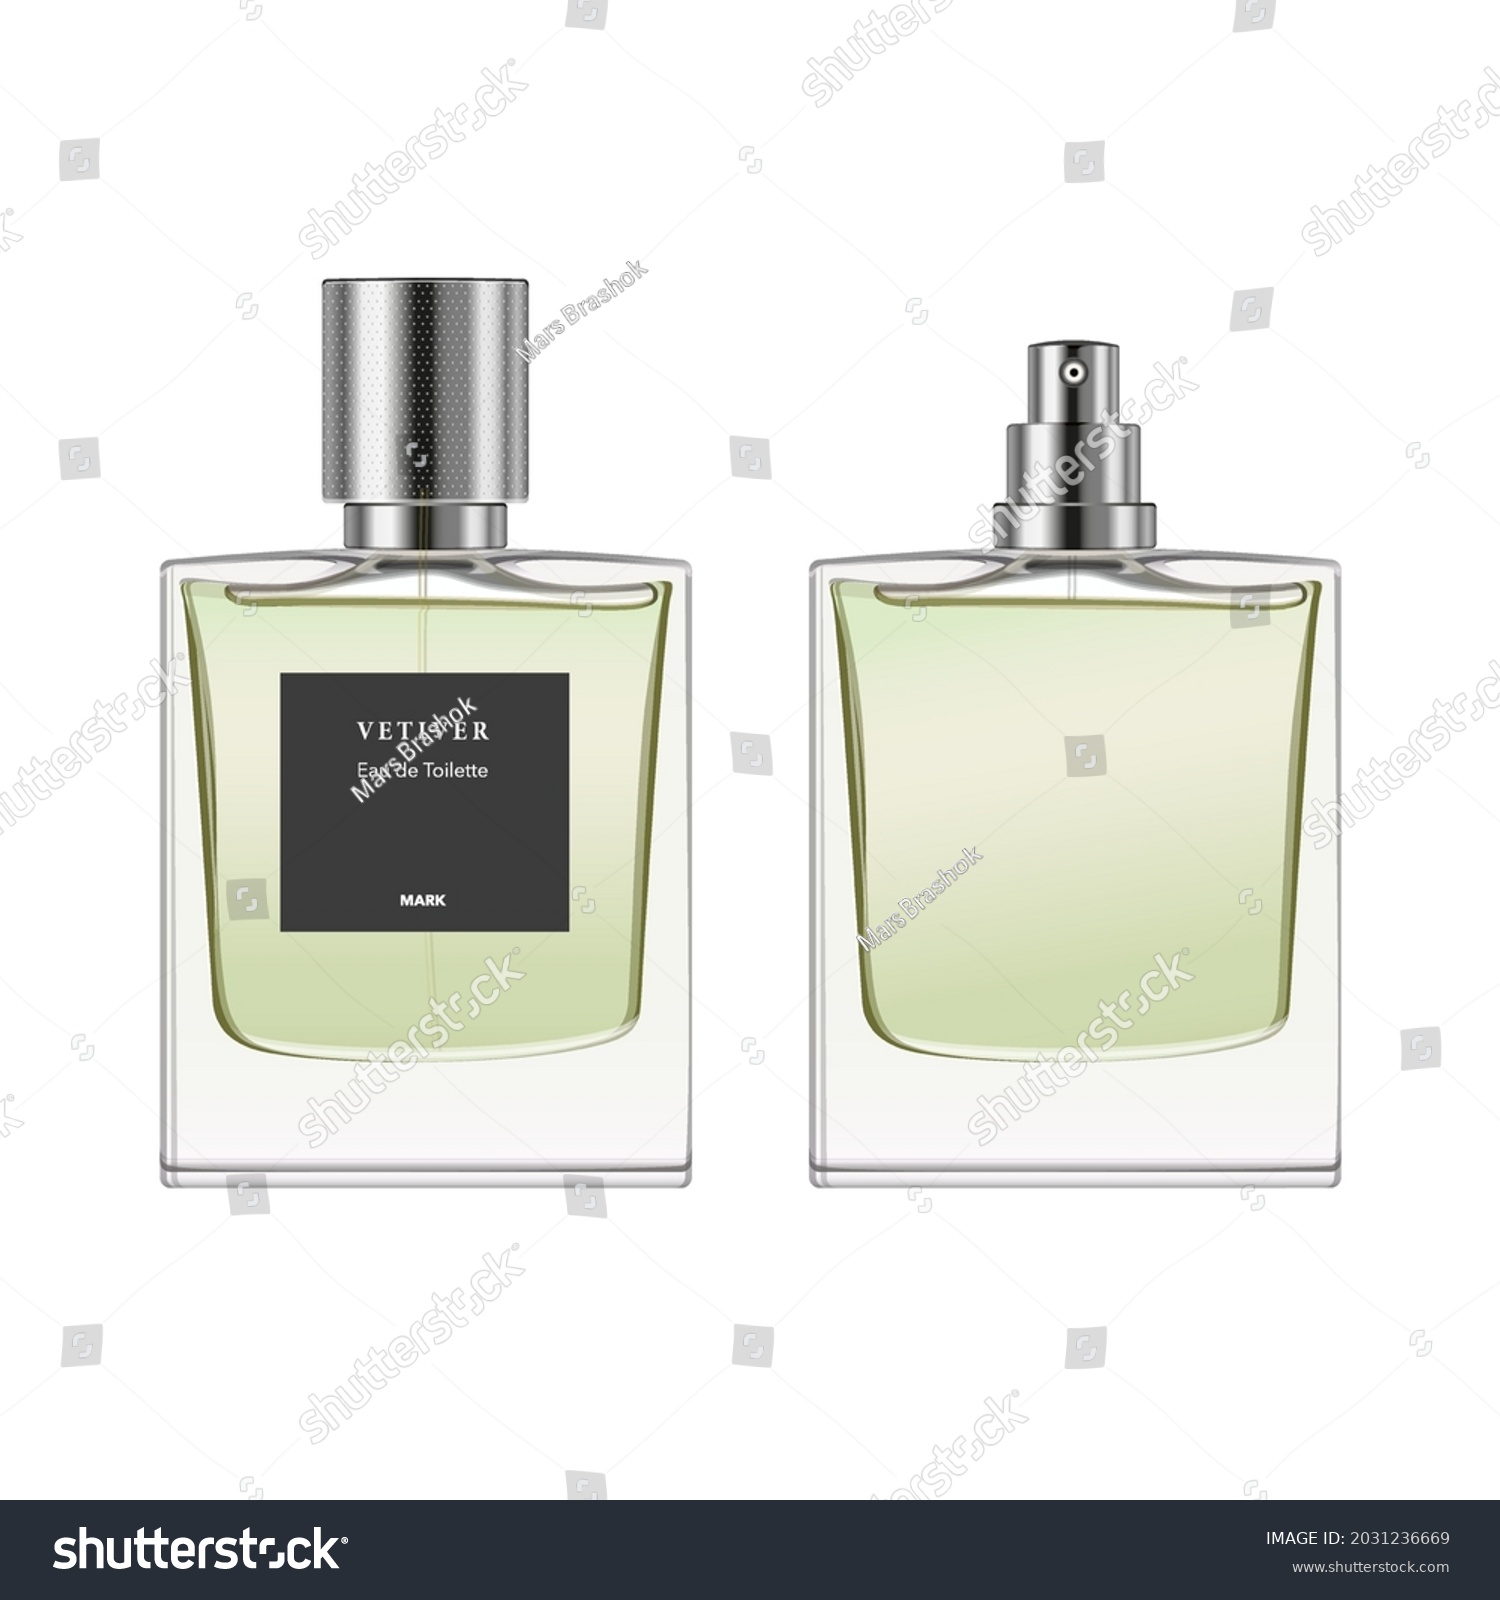 SVG of Perfume glass bottle template. Square transparent fragrance package with steel textured cap, spray, paper label, light green liquid. 3d vector mockup for ad and branding. Beauty product illustration. svg